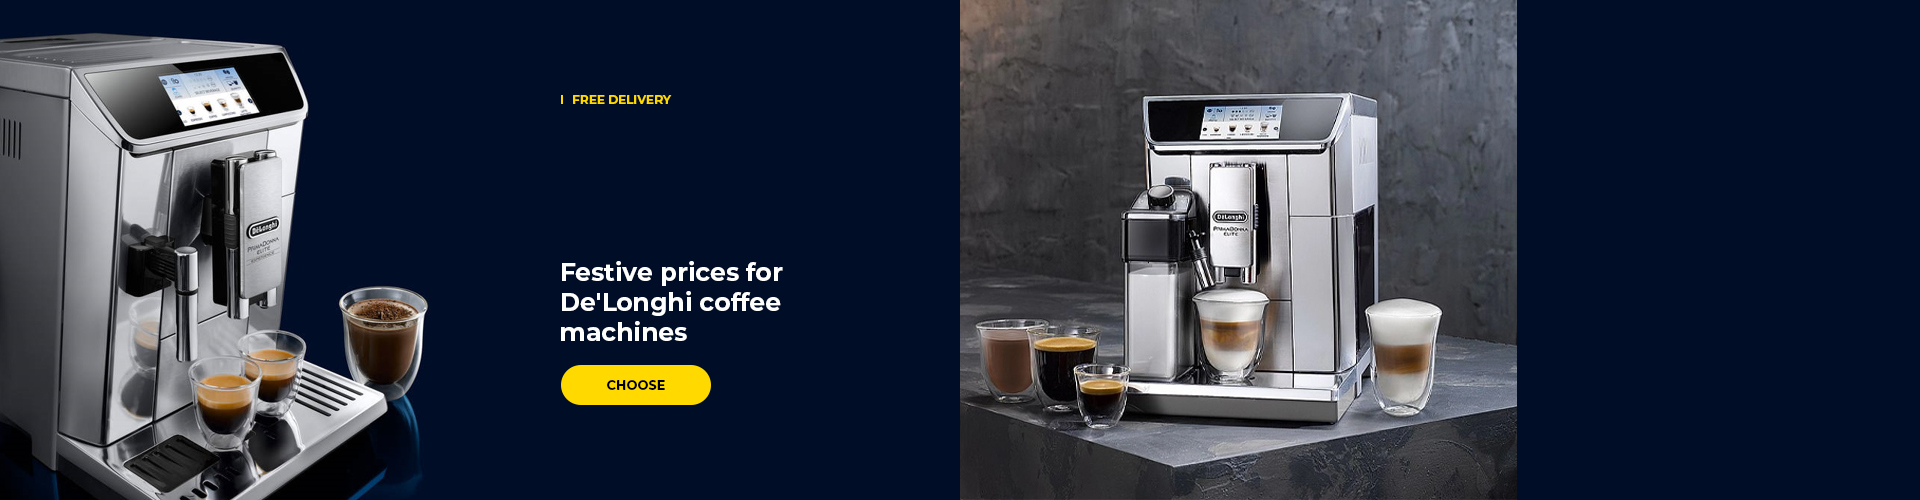 Festive prices for De'Longhi coffee machines